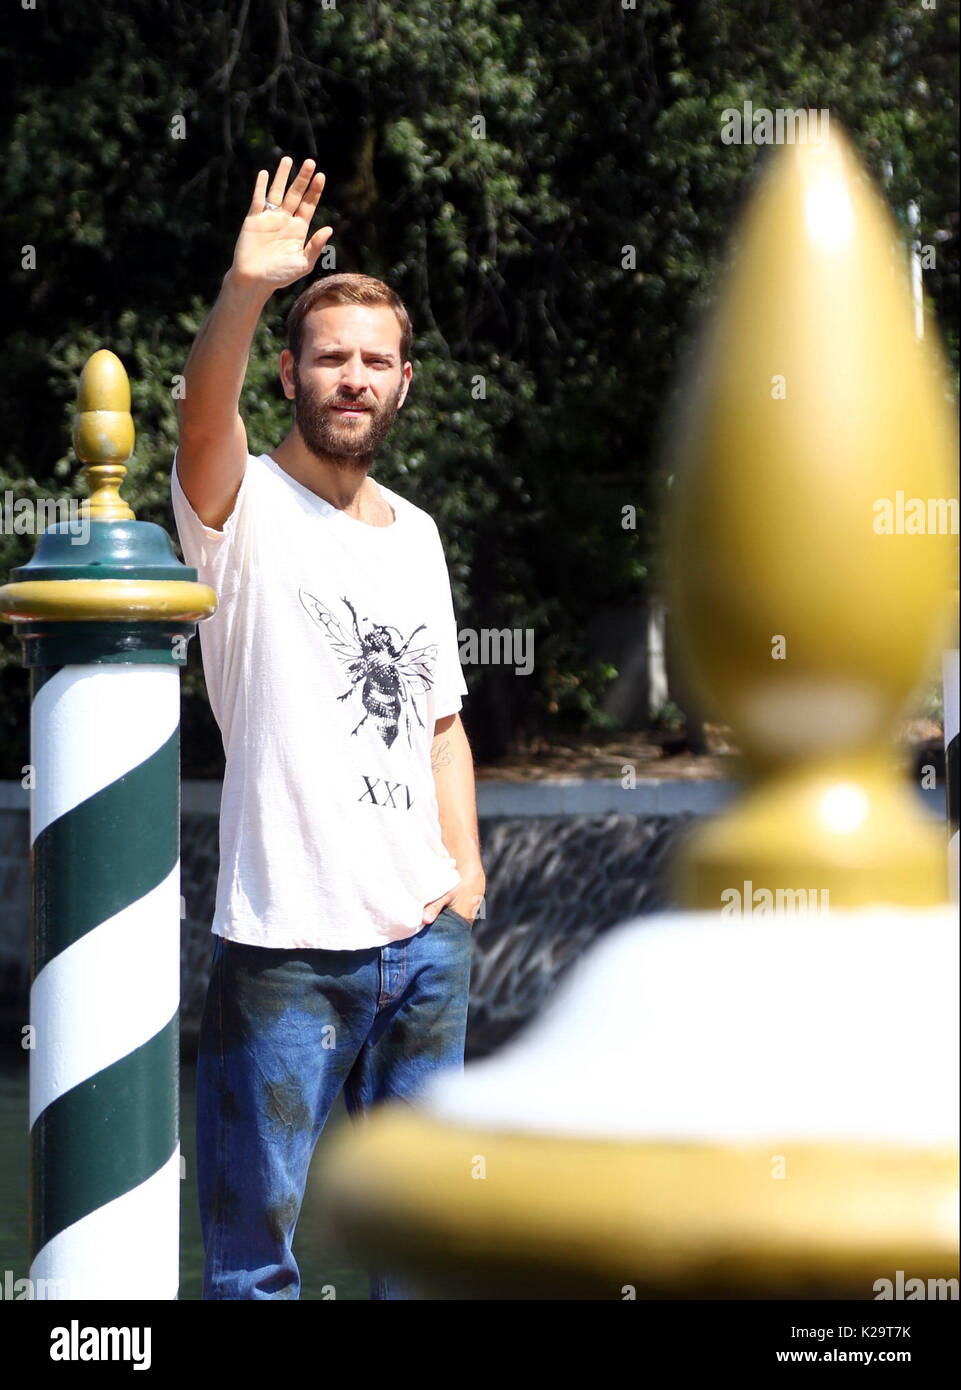 Venice, Italy. 29th August, 2017. The italian actor Alessandro Borghi will host the opening and closing ceremony during the 74th Venice International Film Festival in Venice Lido, Italy, 29 August 2017.(will run from August 30th to September 9th) Credit: Andrea Spinelli/Alamy Live News Stock Photo